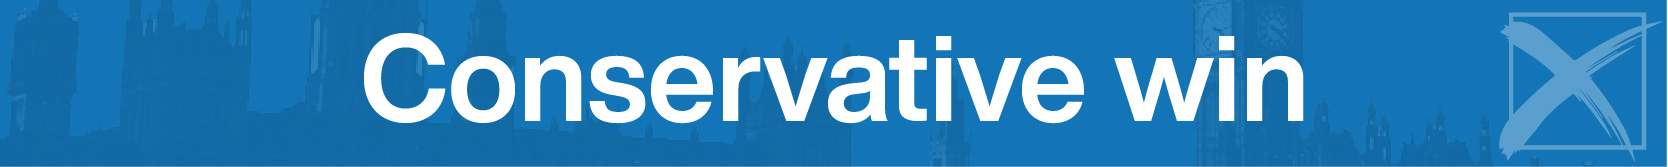 Banner graphic announcing a "Conservative win" in white writing against a blue background with a faded image of the Houses of Parliament.